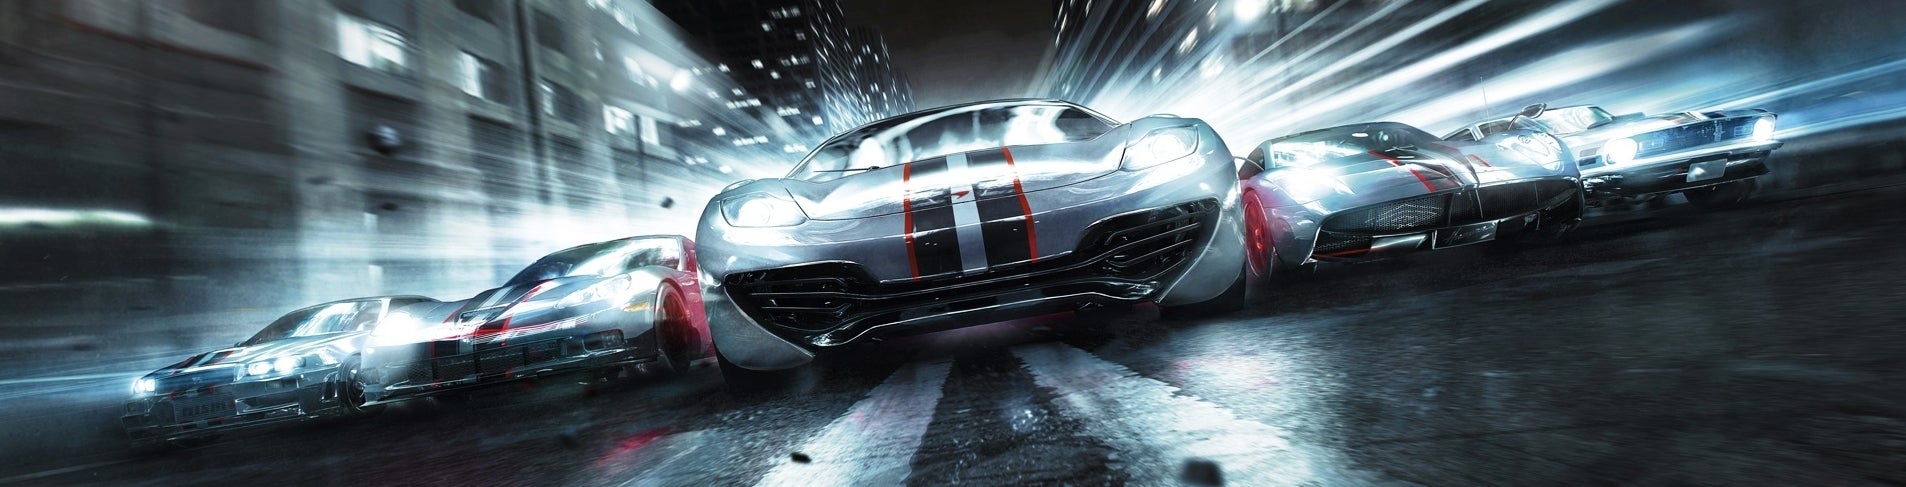 Image for Grid 2 preview: Storytelling returns to the racing genre